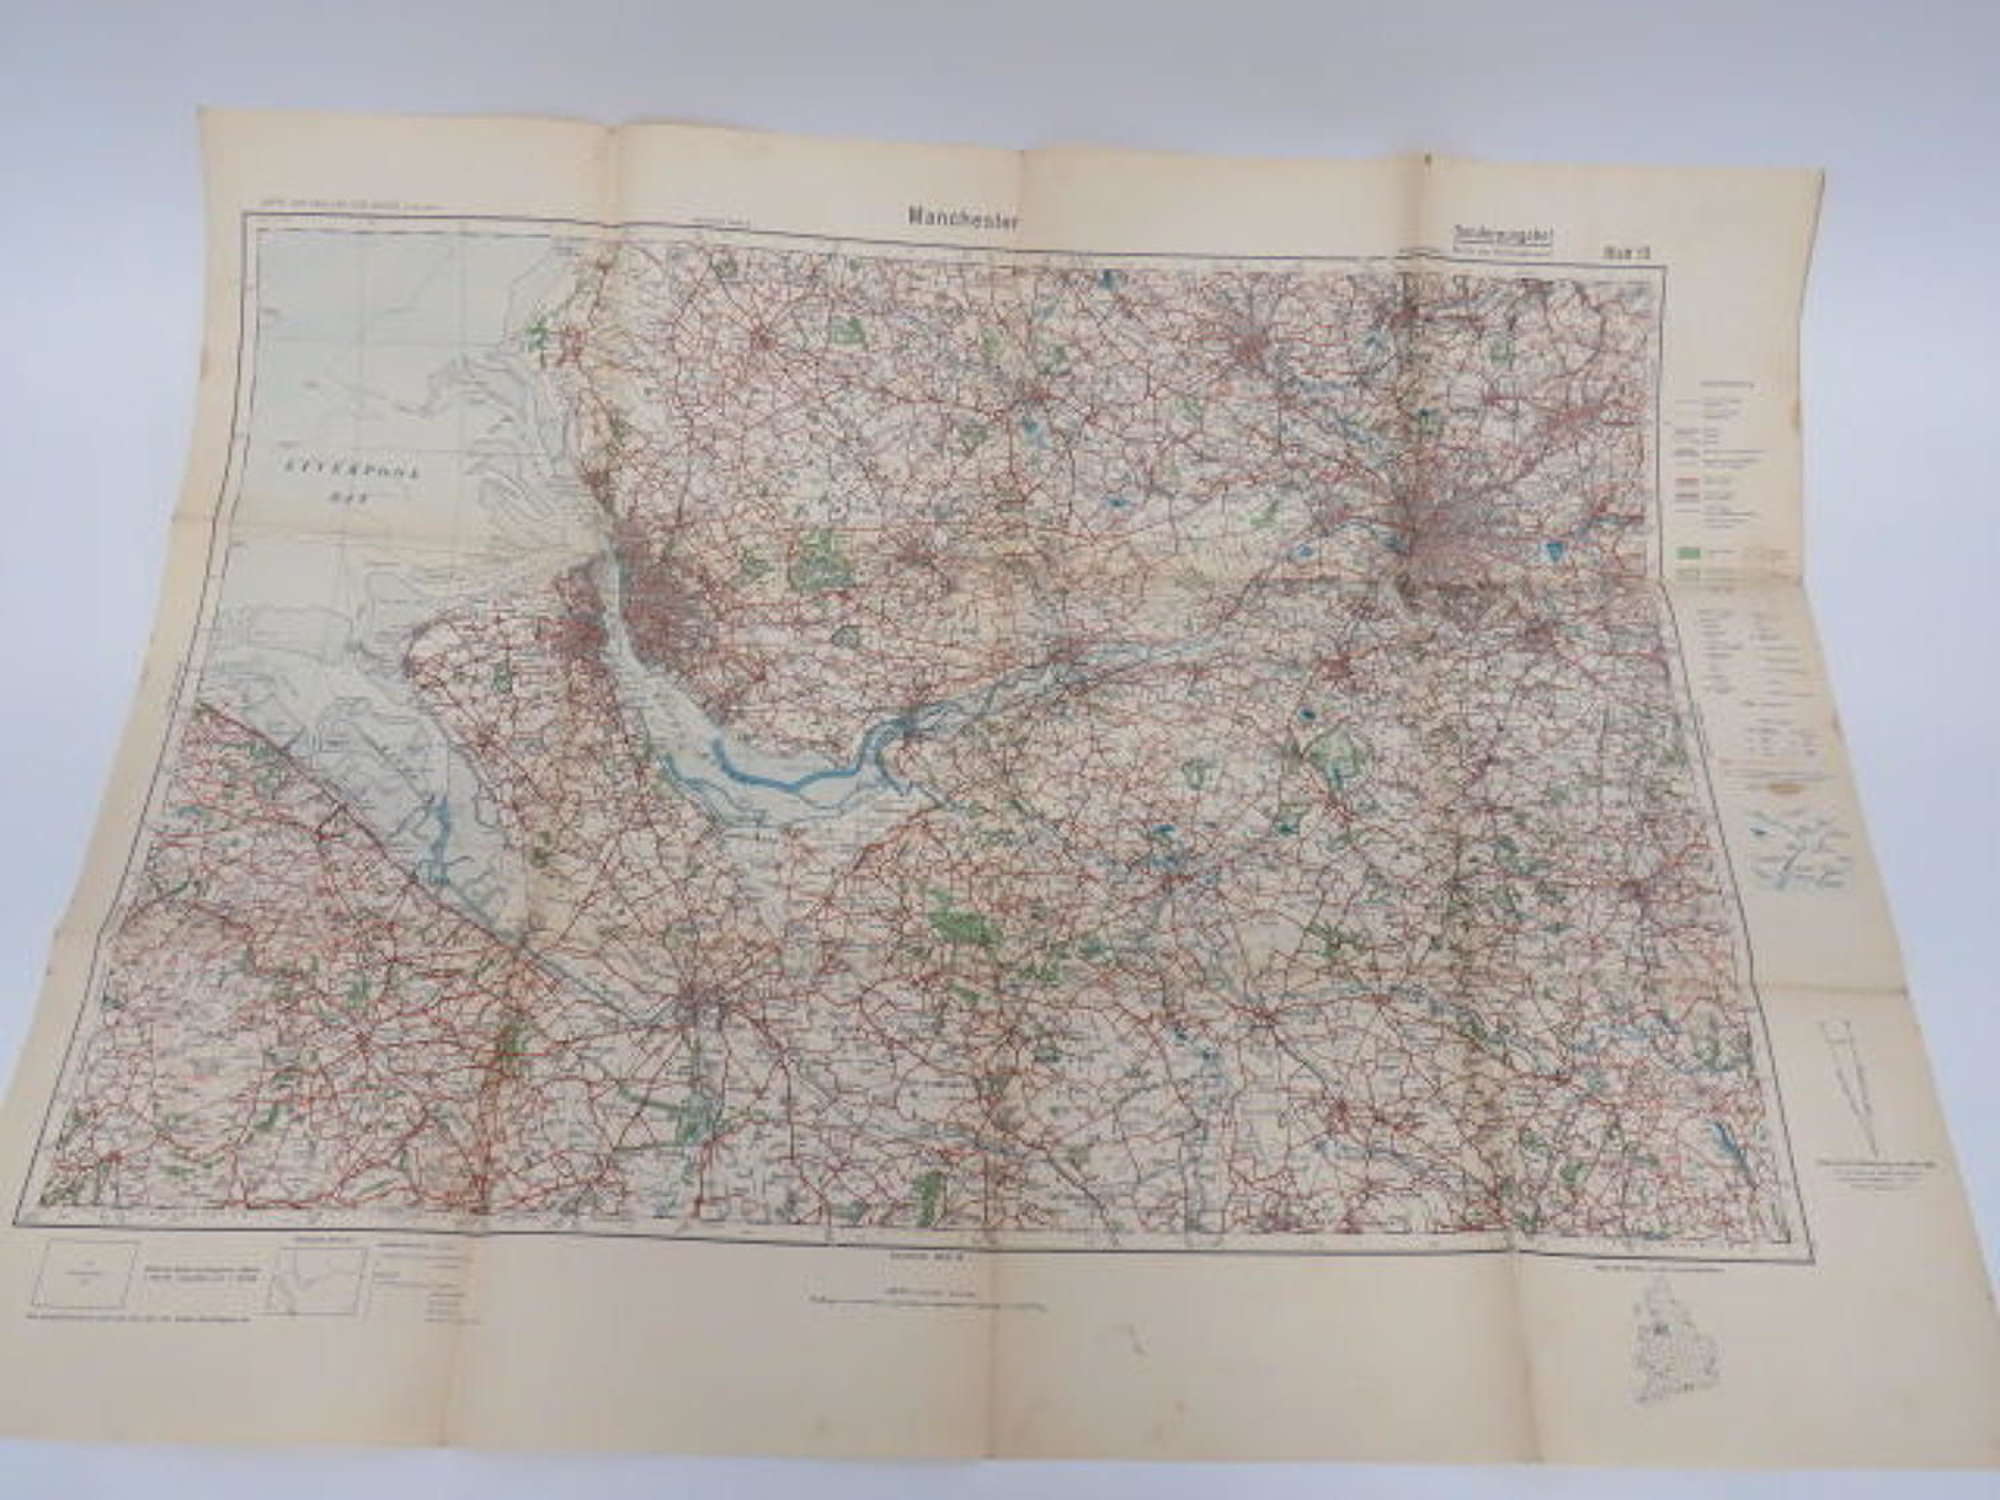 WW 2 German Invasion Map of Manchester/Liverpool